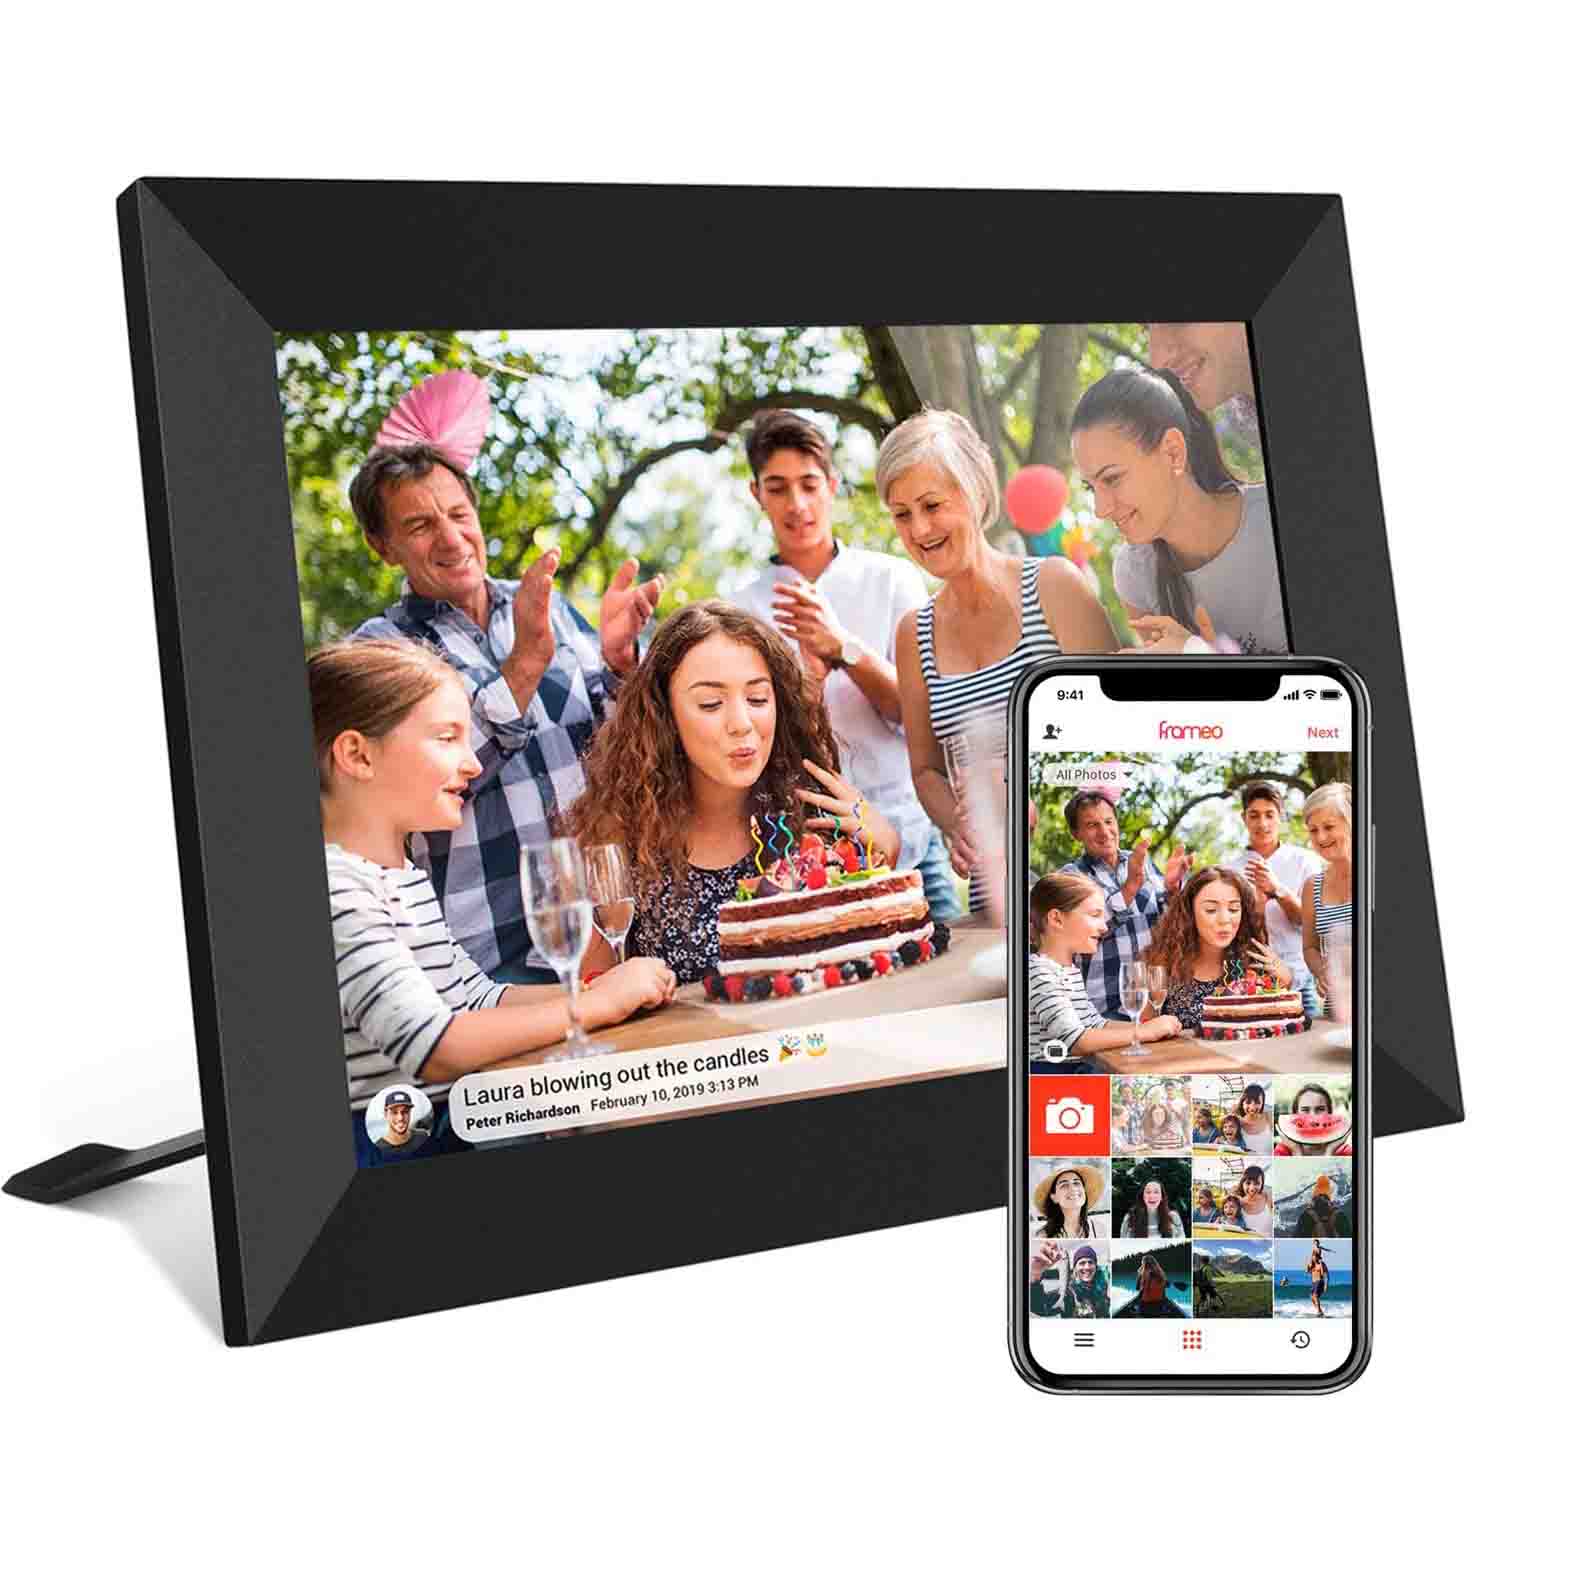 black FRAMEO 10.1 Inch Smart WiFi Digital Photo Frame connected to a smartphone